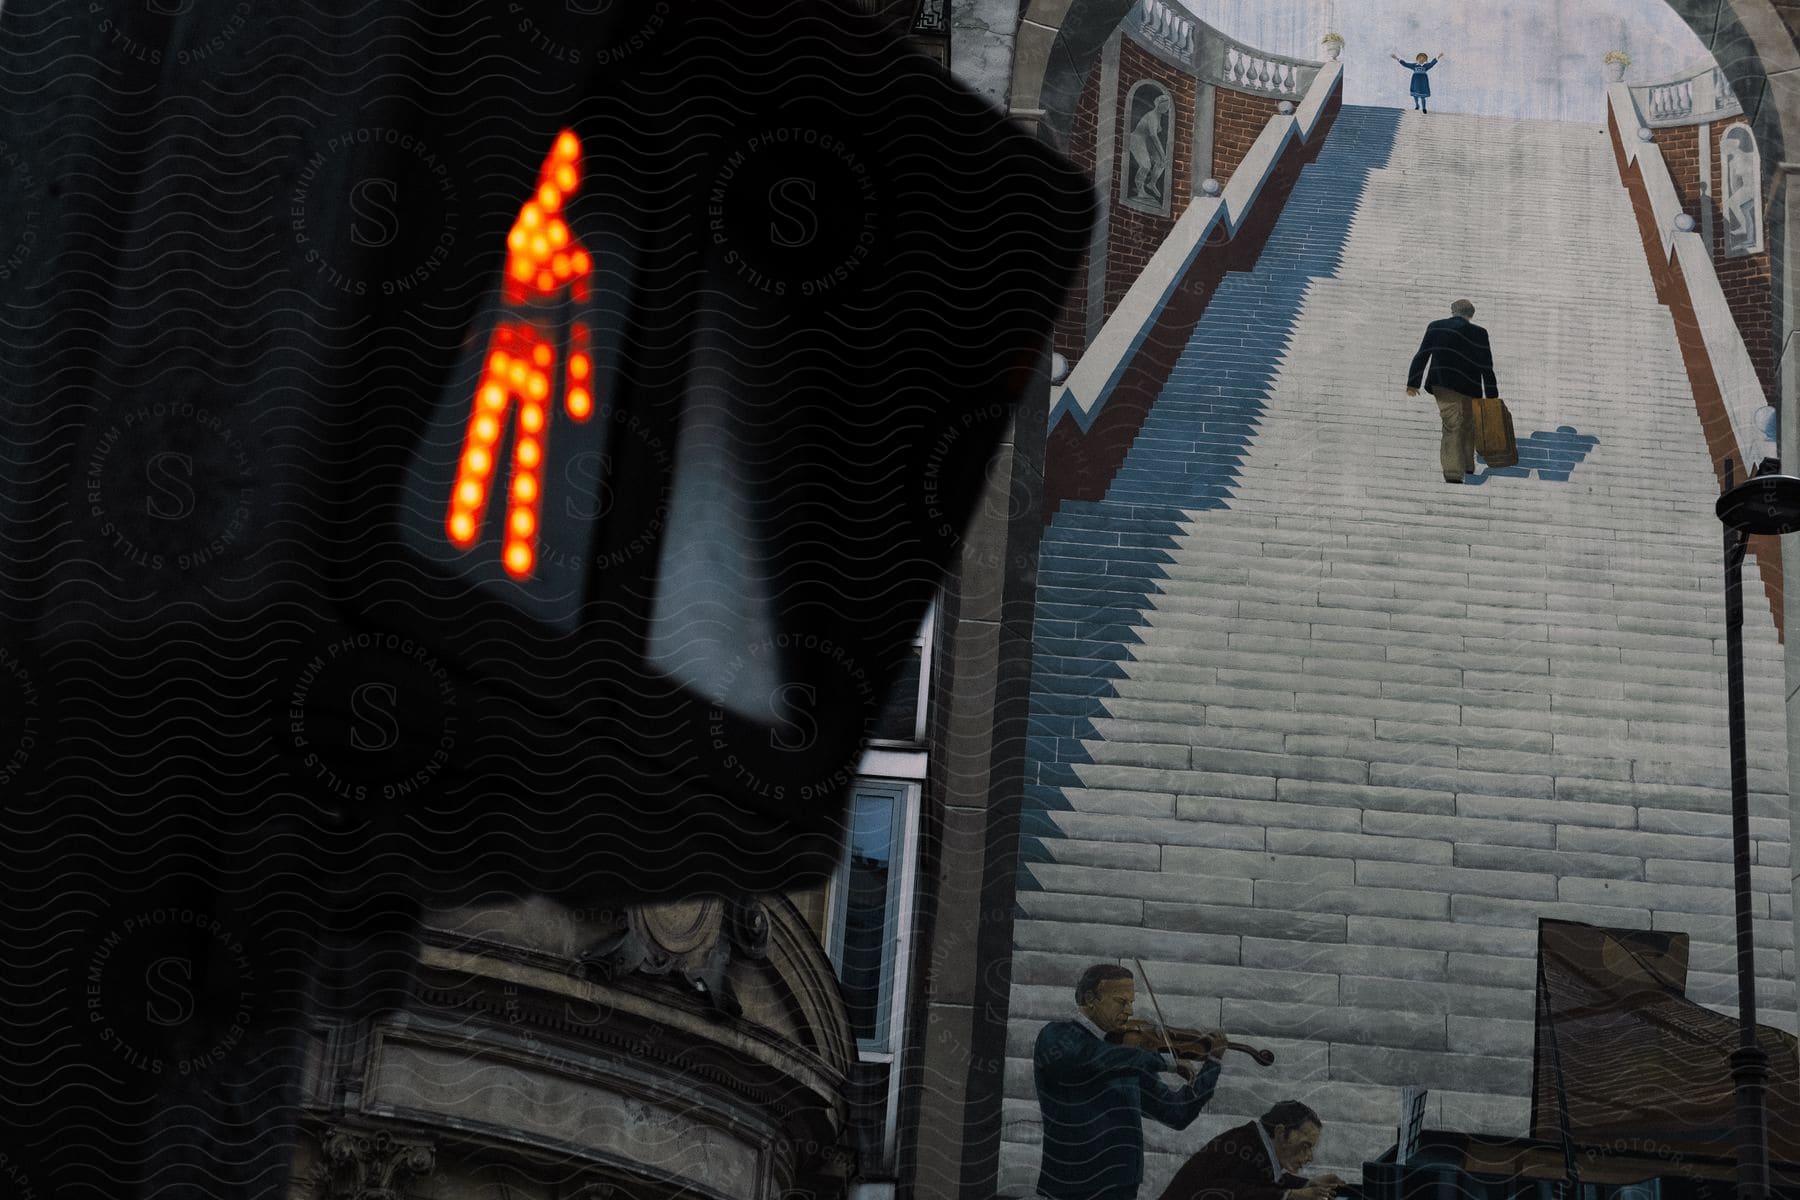 A mural of a man walking up stairs with a dont walk sign in the foreground